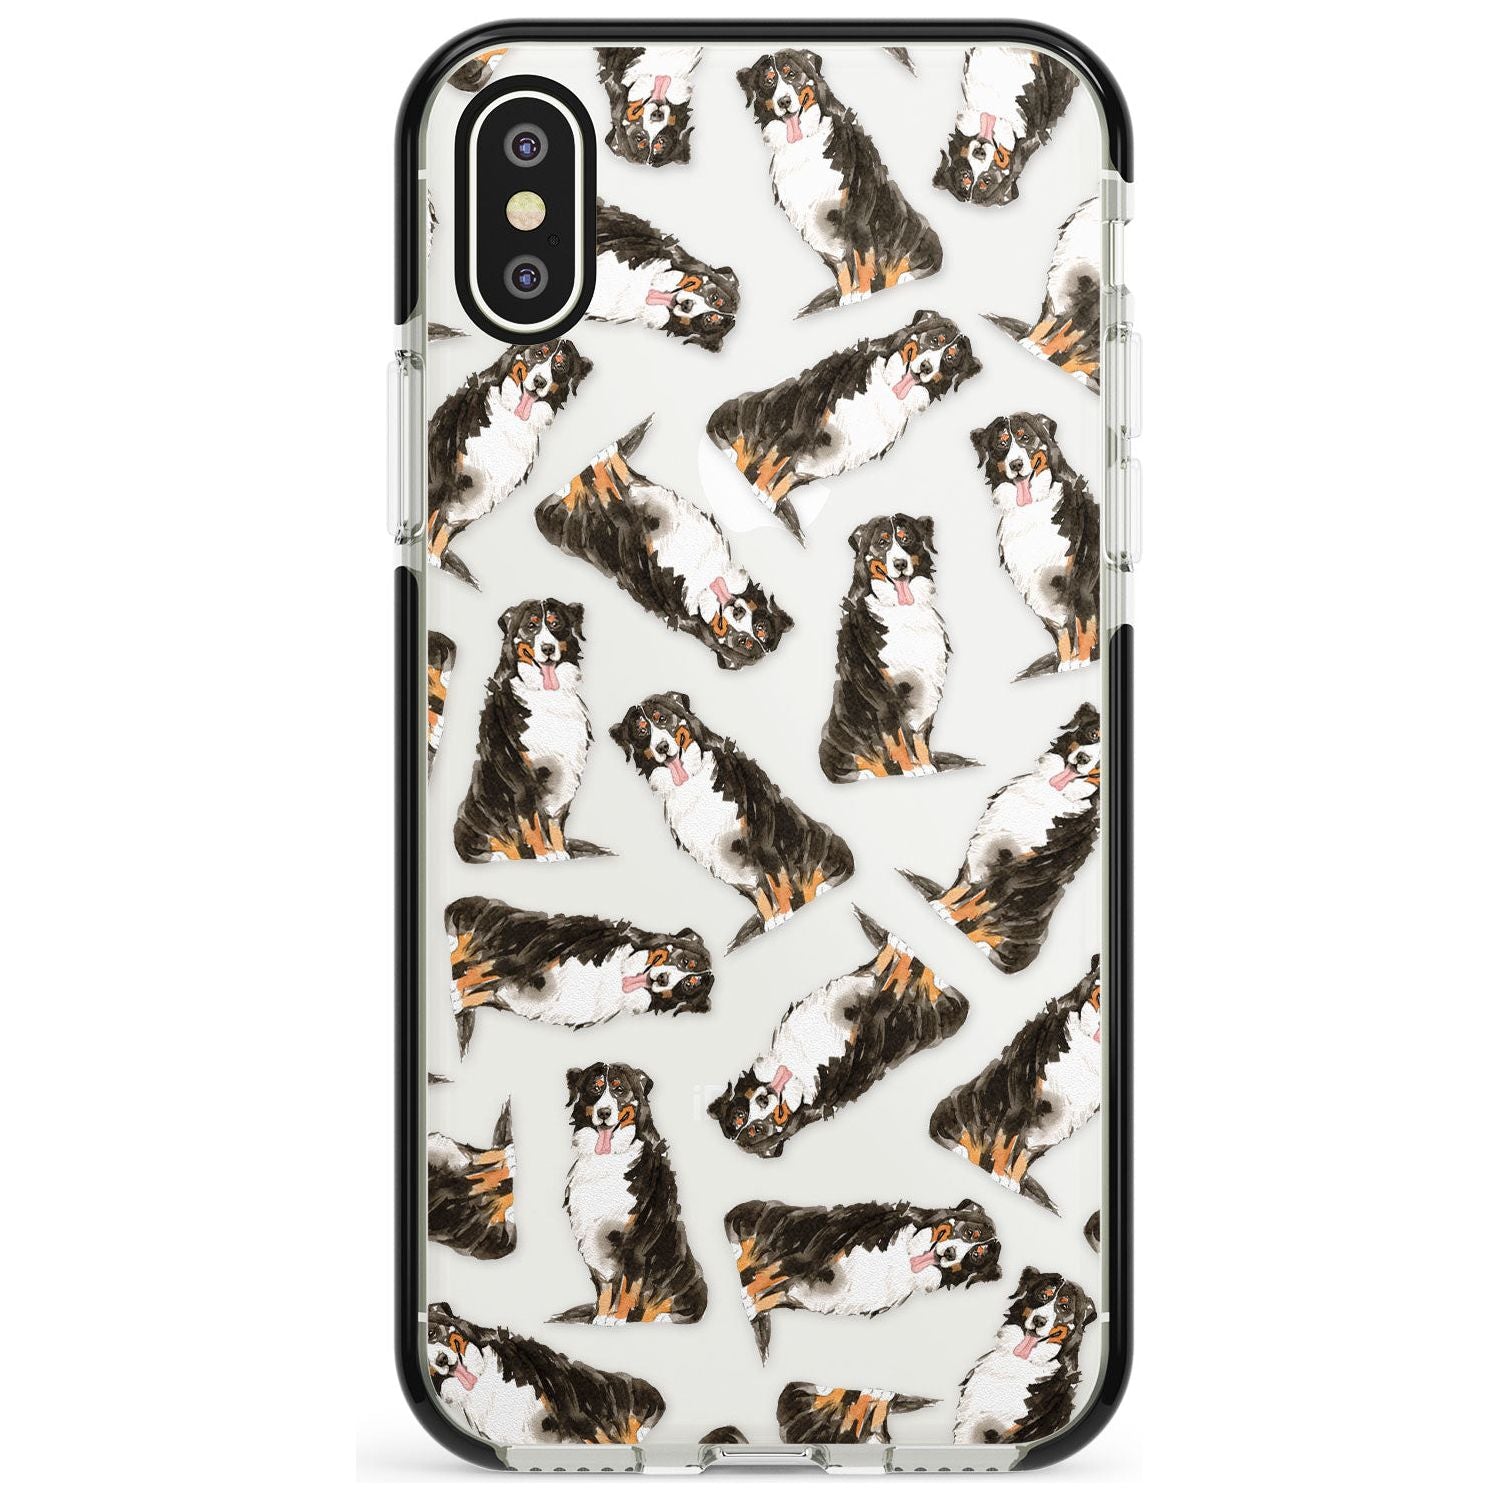 Bernese Mountain Dog Watercolour Dog Pattern Black Impact Phone Case for iPhone X XS Max XR